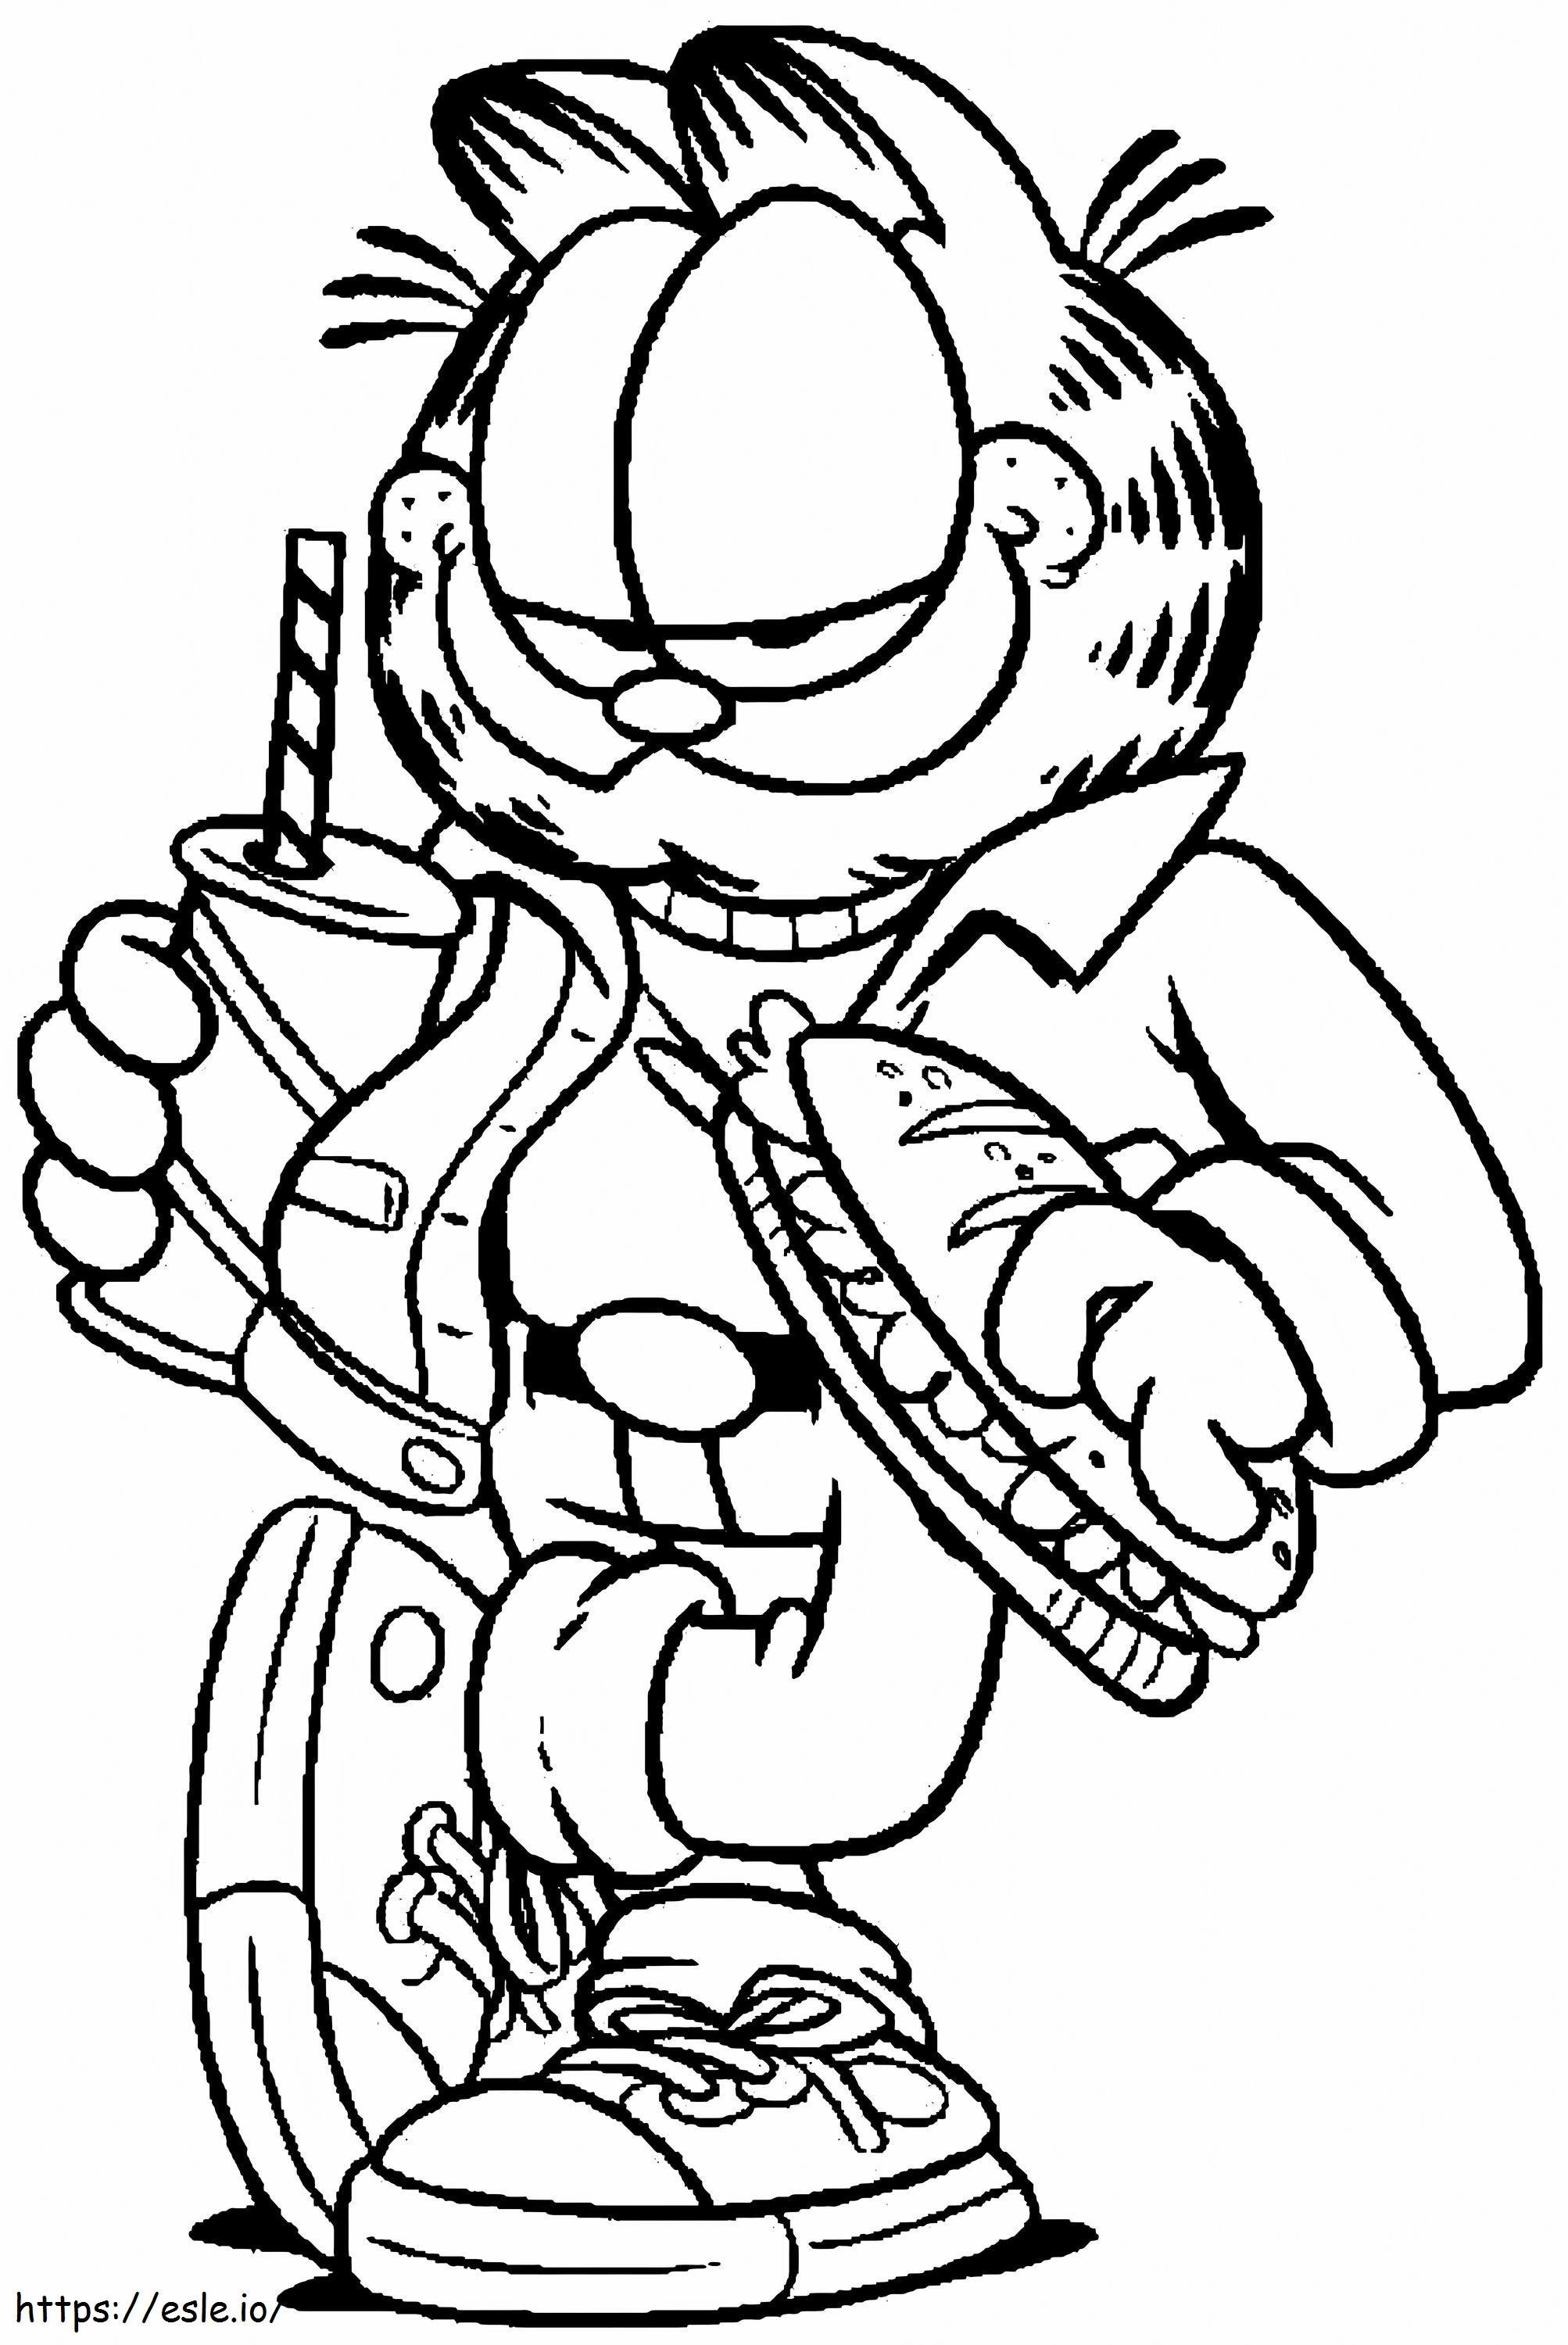 Garfield Holding Hotdog And Drink coloring page